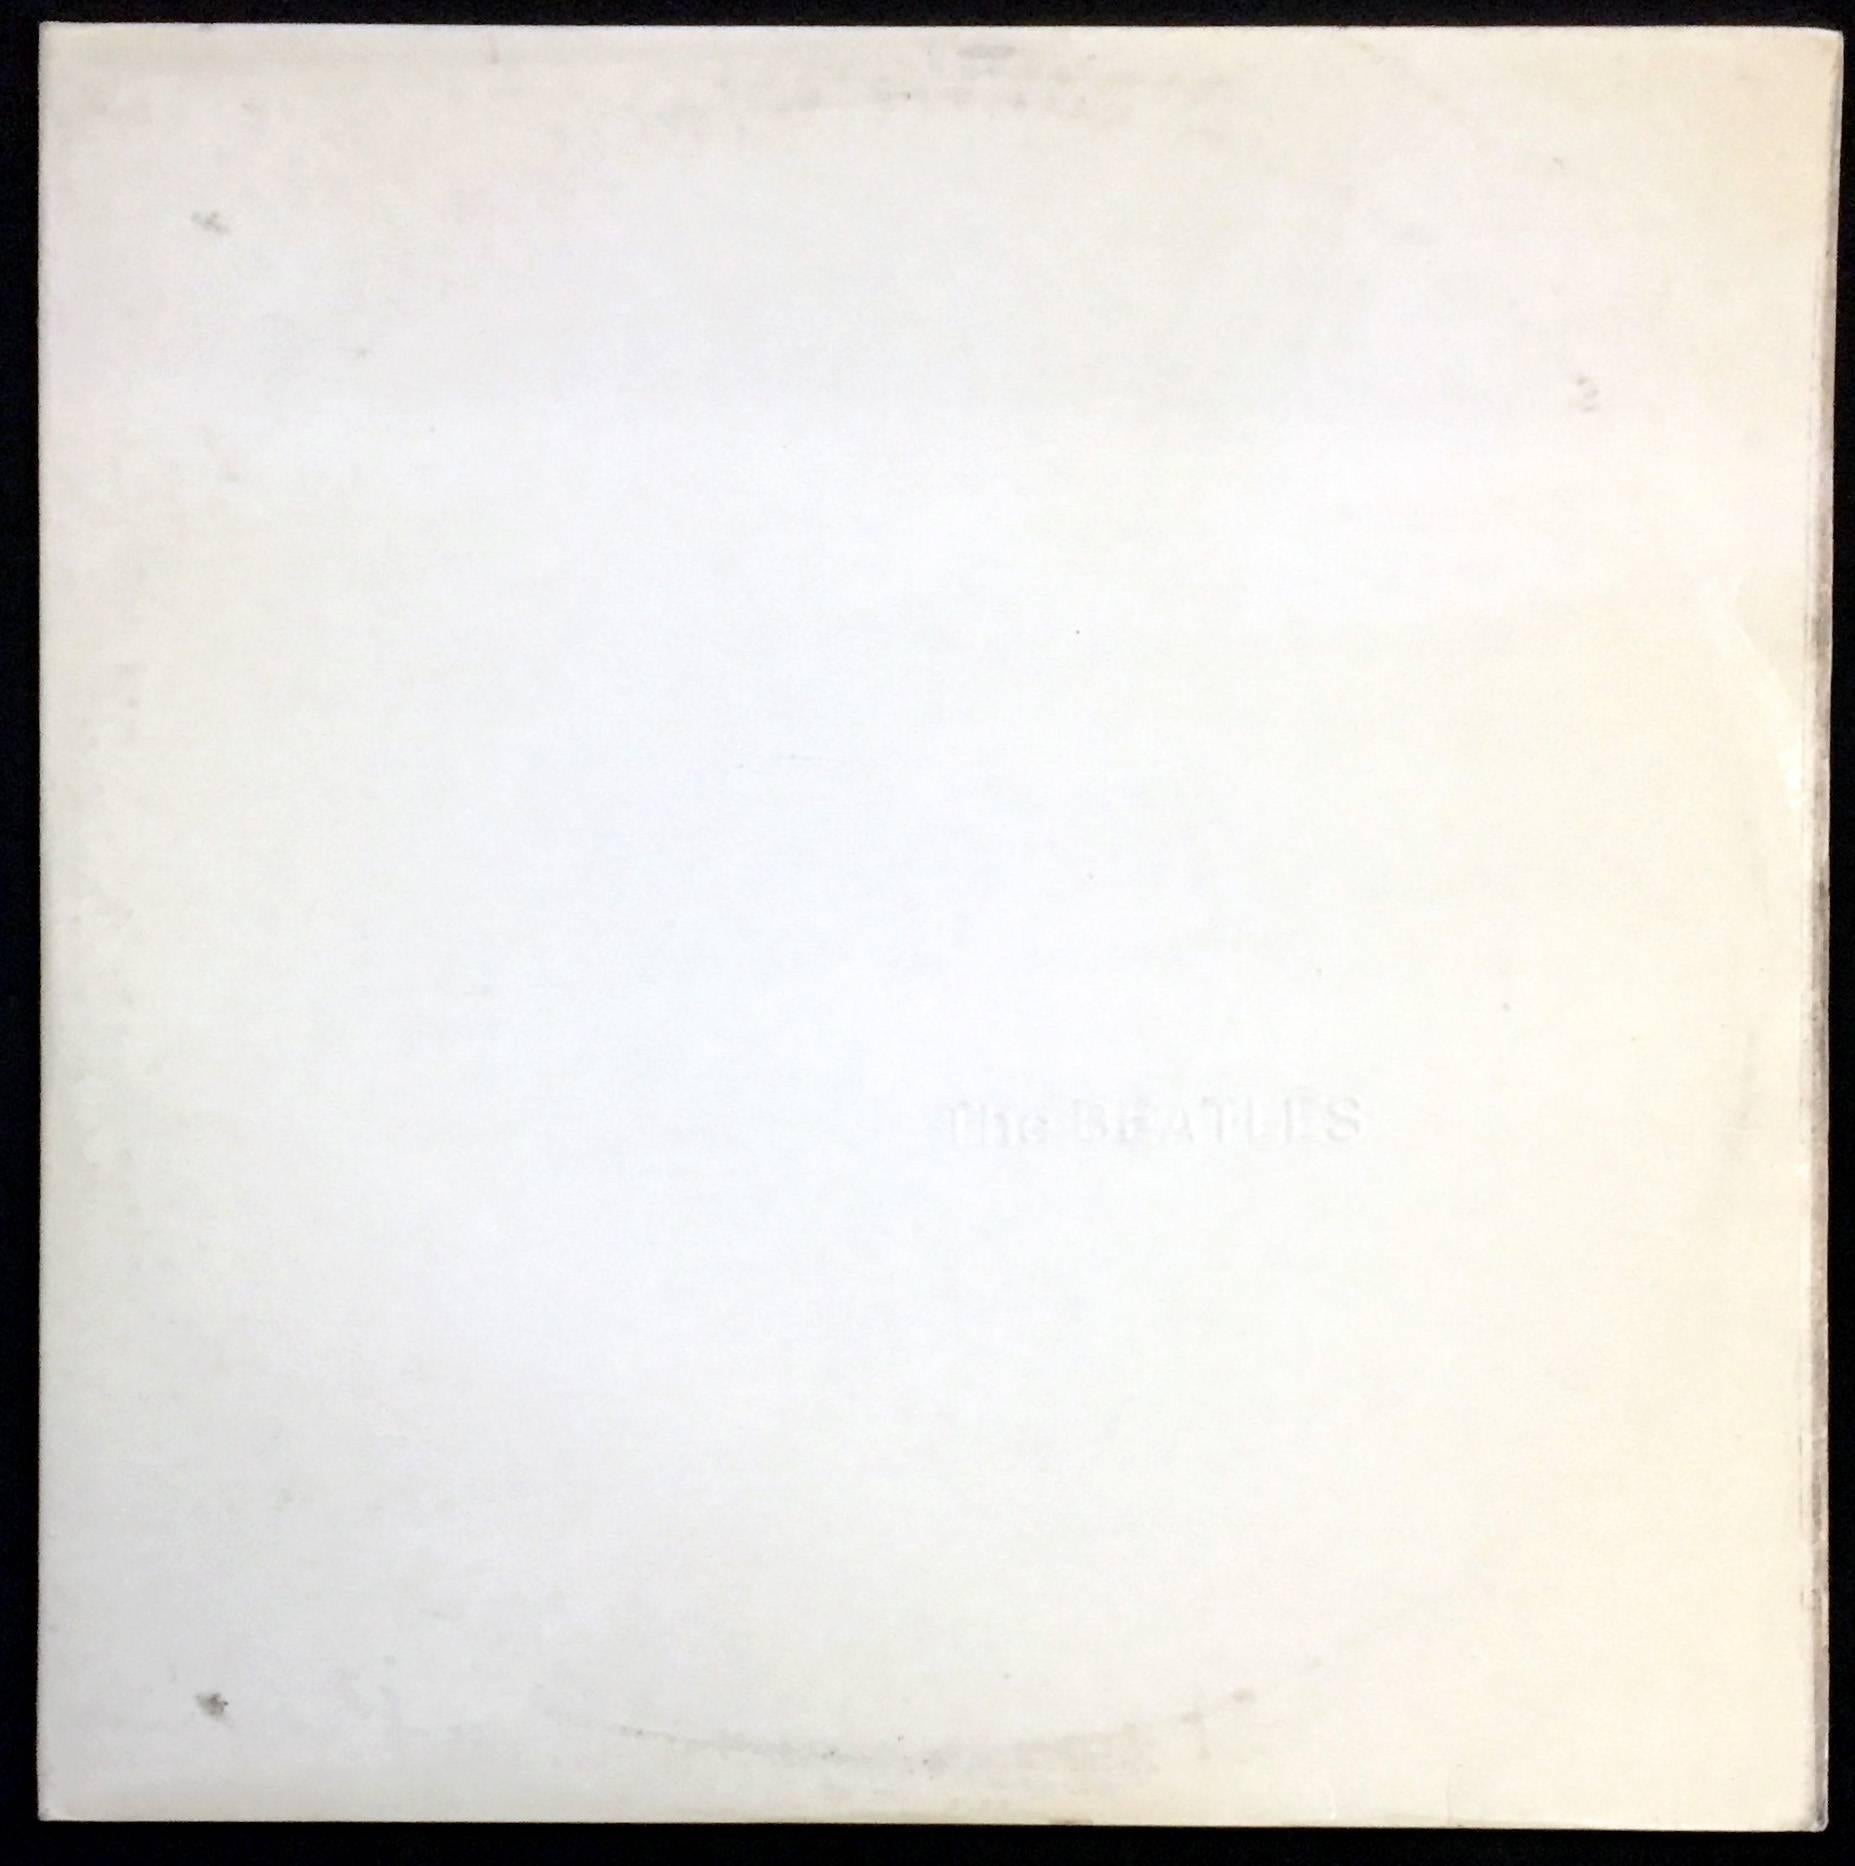 A rare sought after, 1978 UK, special White Vinyl Apple pressing of The Beatles famed White Album. Includes full set of posters as pictured. 

Vinyl: All four records are in excellent condition and free of any visible scratches.
Cover: signs of